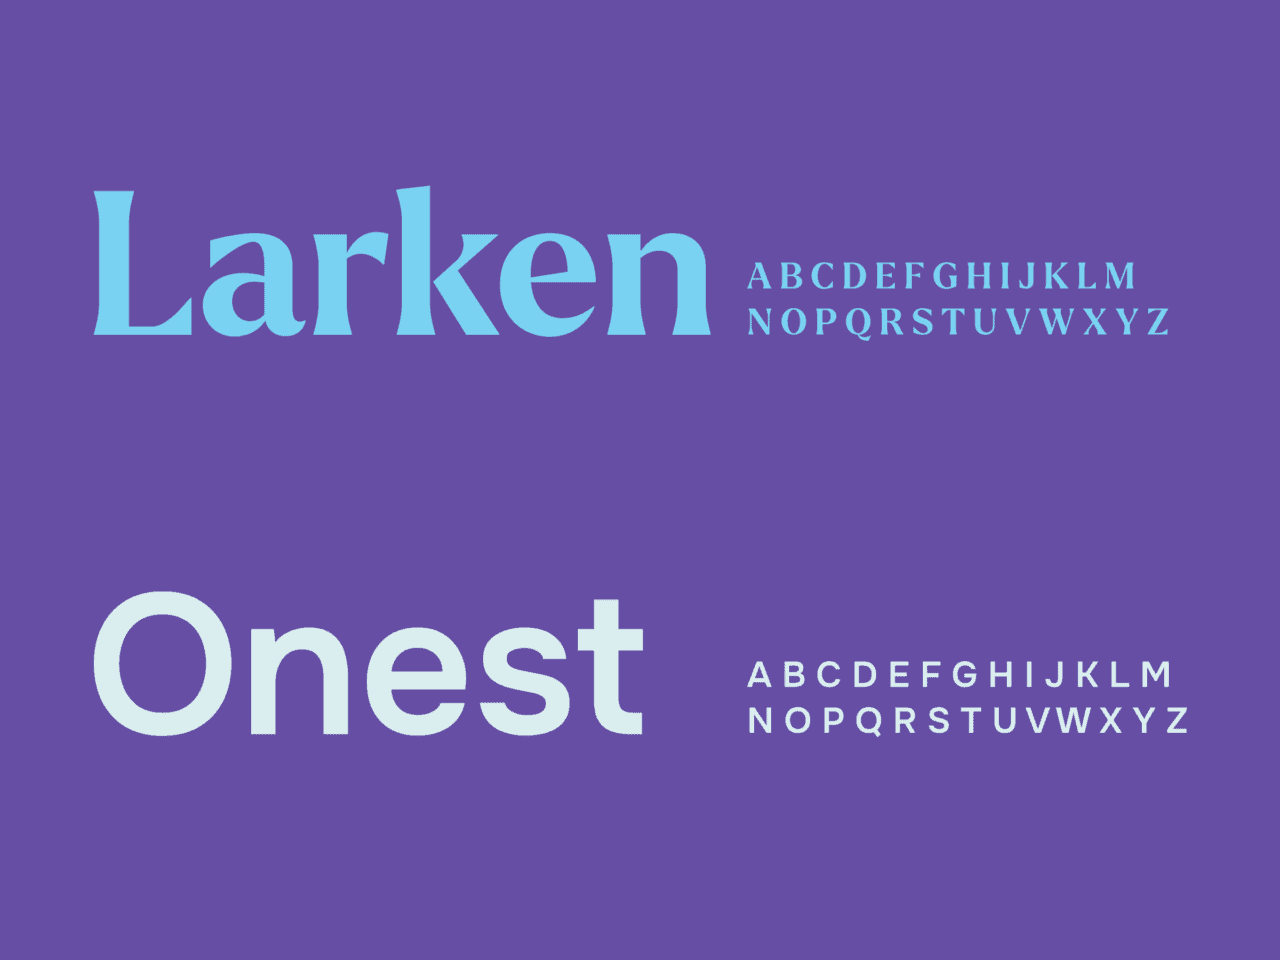 Typography example for titles and body: Larken and Onset respectively